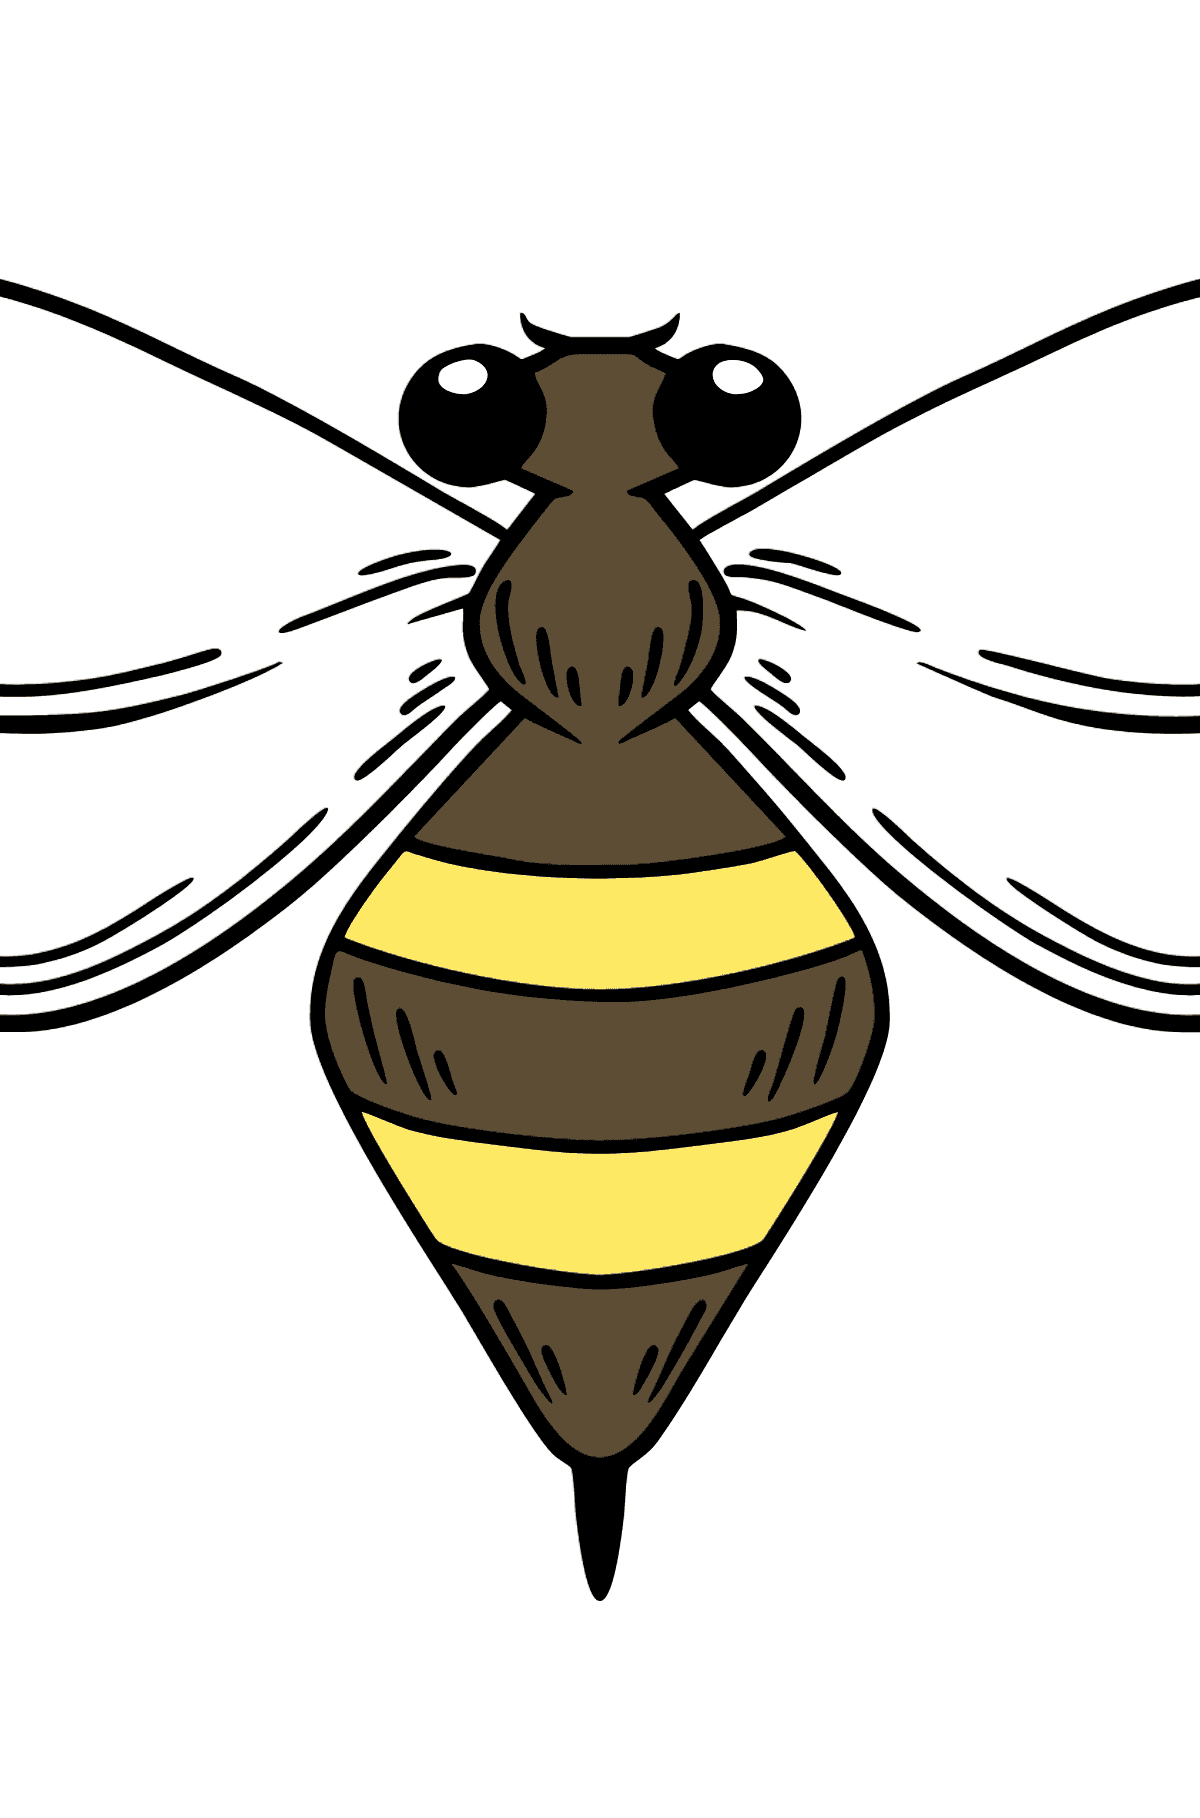 Wasp coloring page - Coloring Pages for Kids